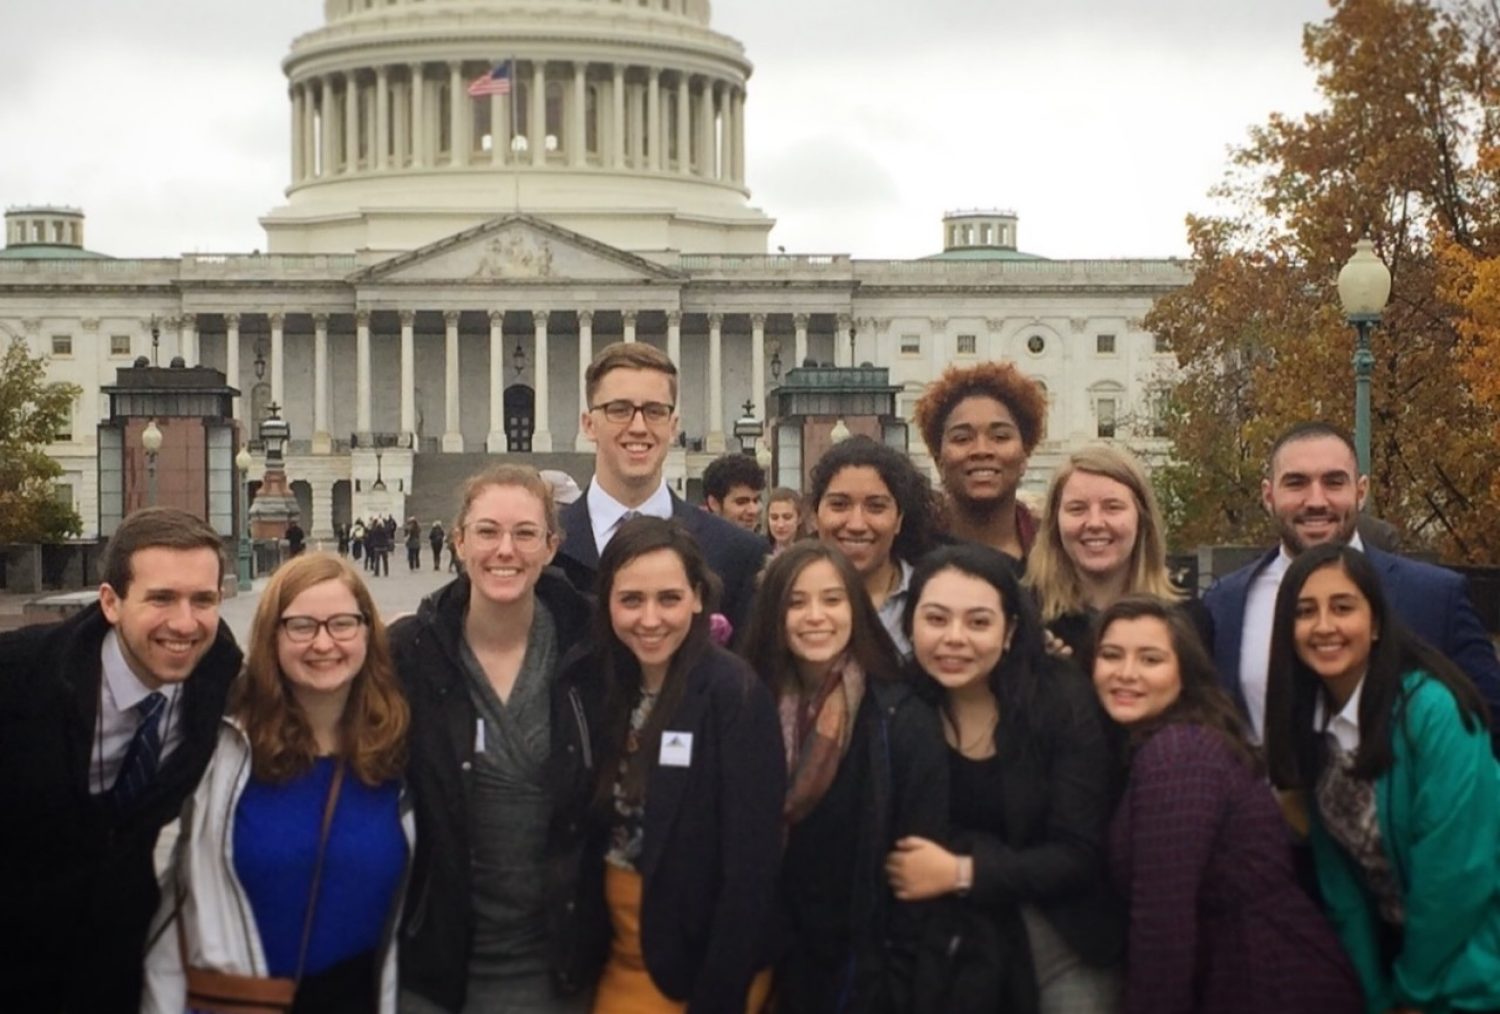 Group of students standing in front of United States Capitol building